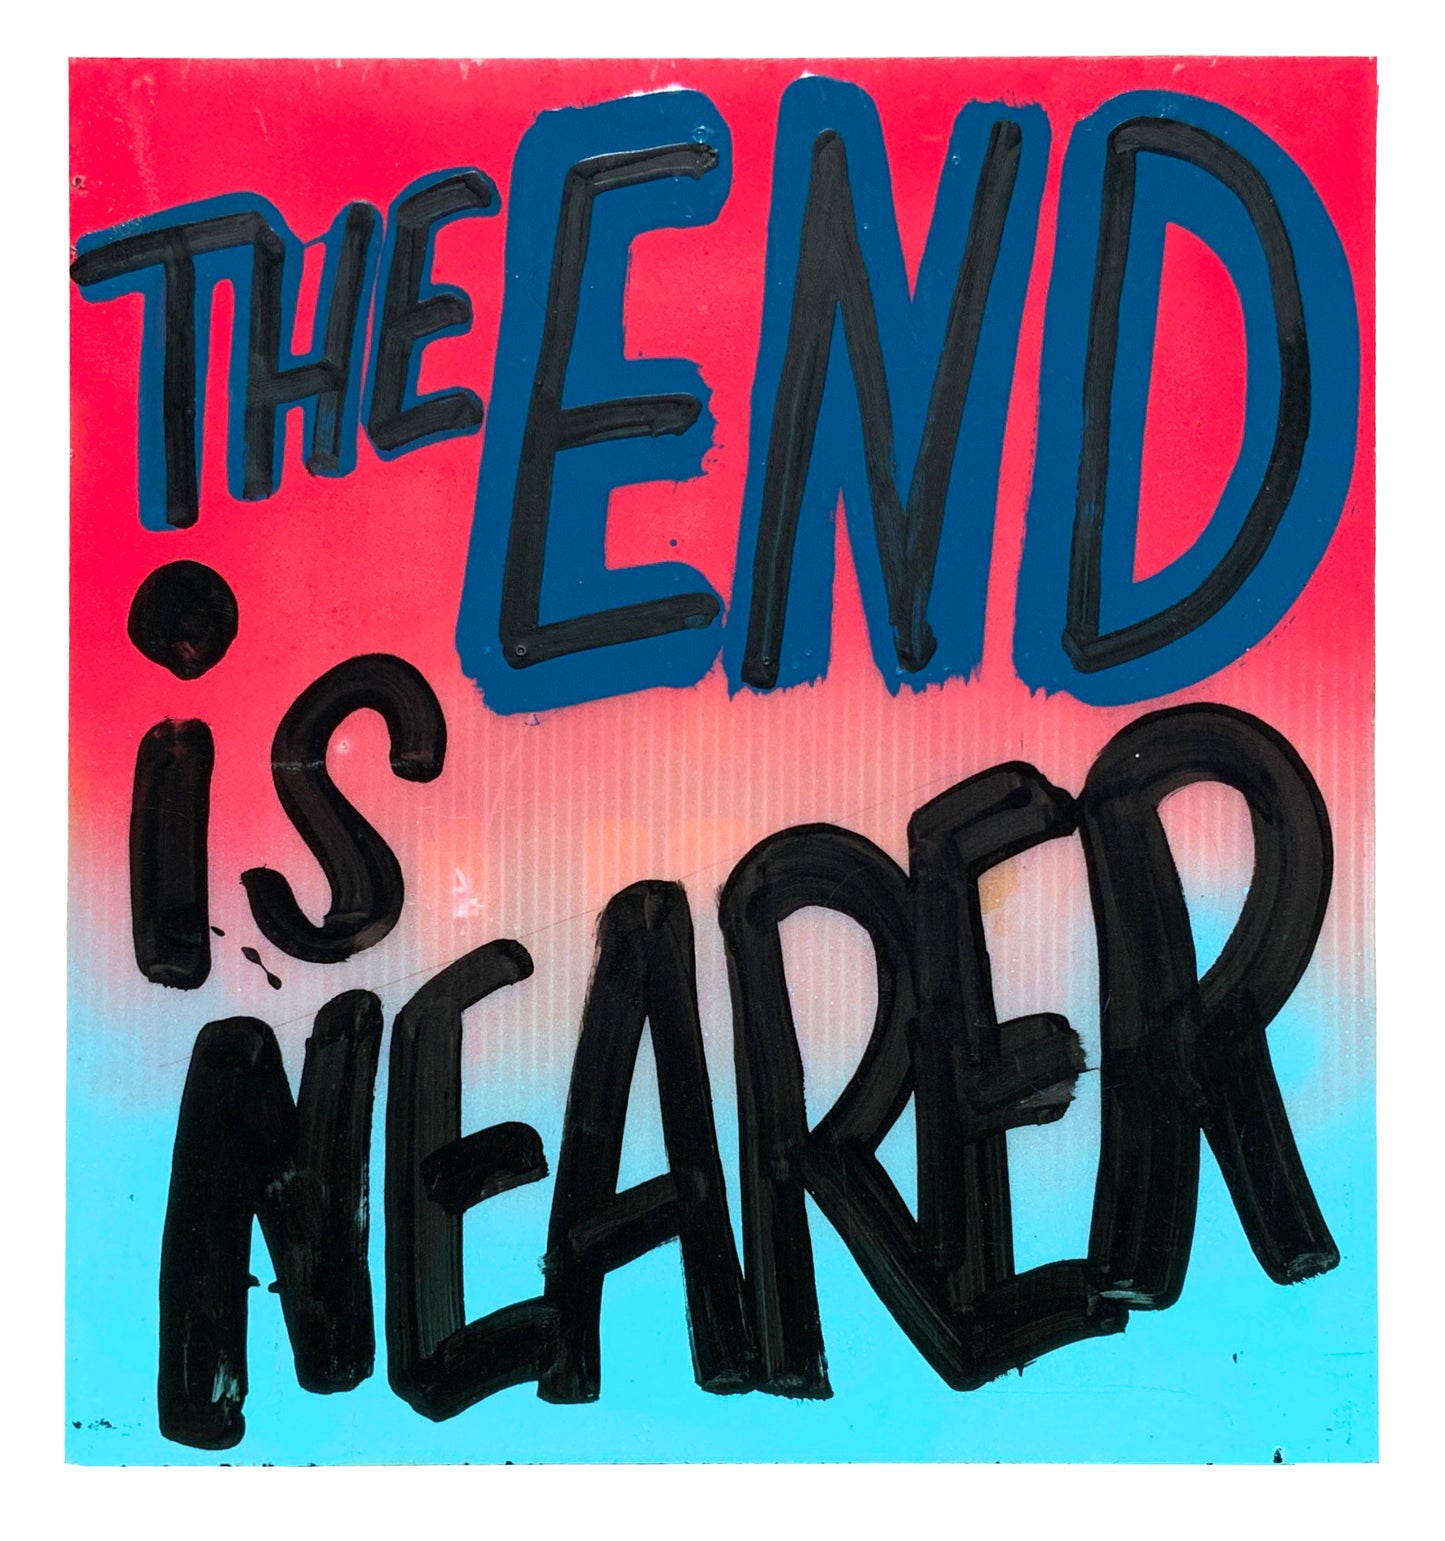 "The End Is Nearer" by Cash4 - 2020